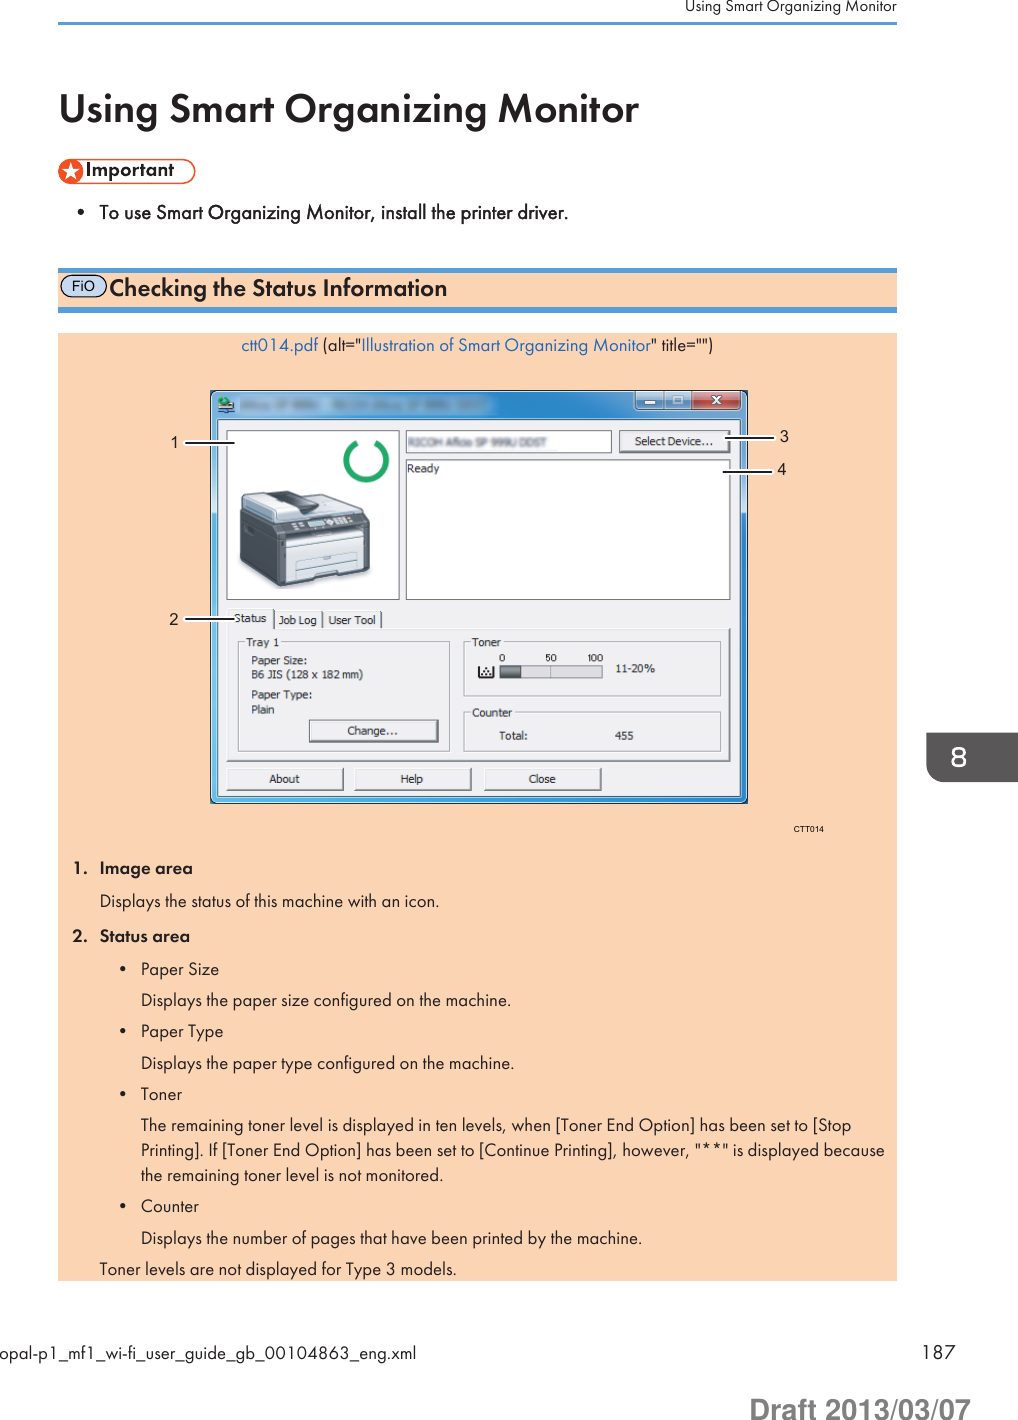 Using Smart Organizing Monitor• To use Smart Organizing Monitor, install the printer driver.FiOChecking the Status Informationctt014.pdf (alt=&quot;Illustration of Smart Organizing Monitor&quot; title=&quot;&quot;)CTT01412341. Image areaDisplays the status of this machine with an icon.2. Status area• Paper SizeDisplays the paper size configured on the machine.• Paper TypeDisplays the paper type configured on the machine.• TonerThe remaining toner level is displayed in ten levels, when [Toner End Option] has been set to [StopPrinting]. If [Toner End Option] has been set to [Continue Printing], however, &quot;**&quot; is displayed becausethe remaining toner level is not monitored.• CounterDisplays the number of pages that have been printed by the machine.Toner levels are not displayed for Type 3 models.Using Smart Organizing Monitoropal-p1_mf1_wi-fi_user_guide_gb_00104863_eng.xml 187Draft 2013/03/07